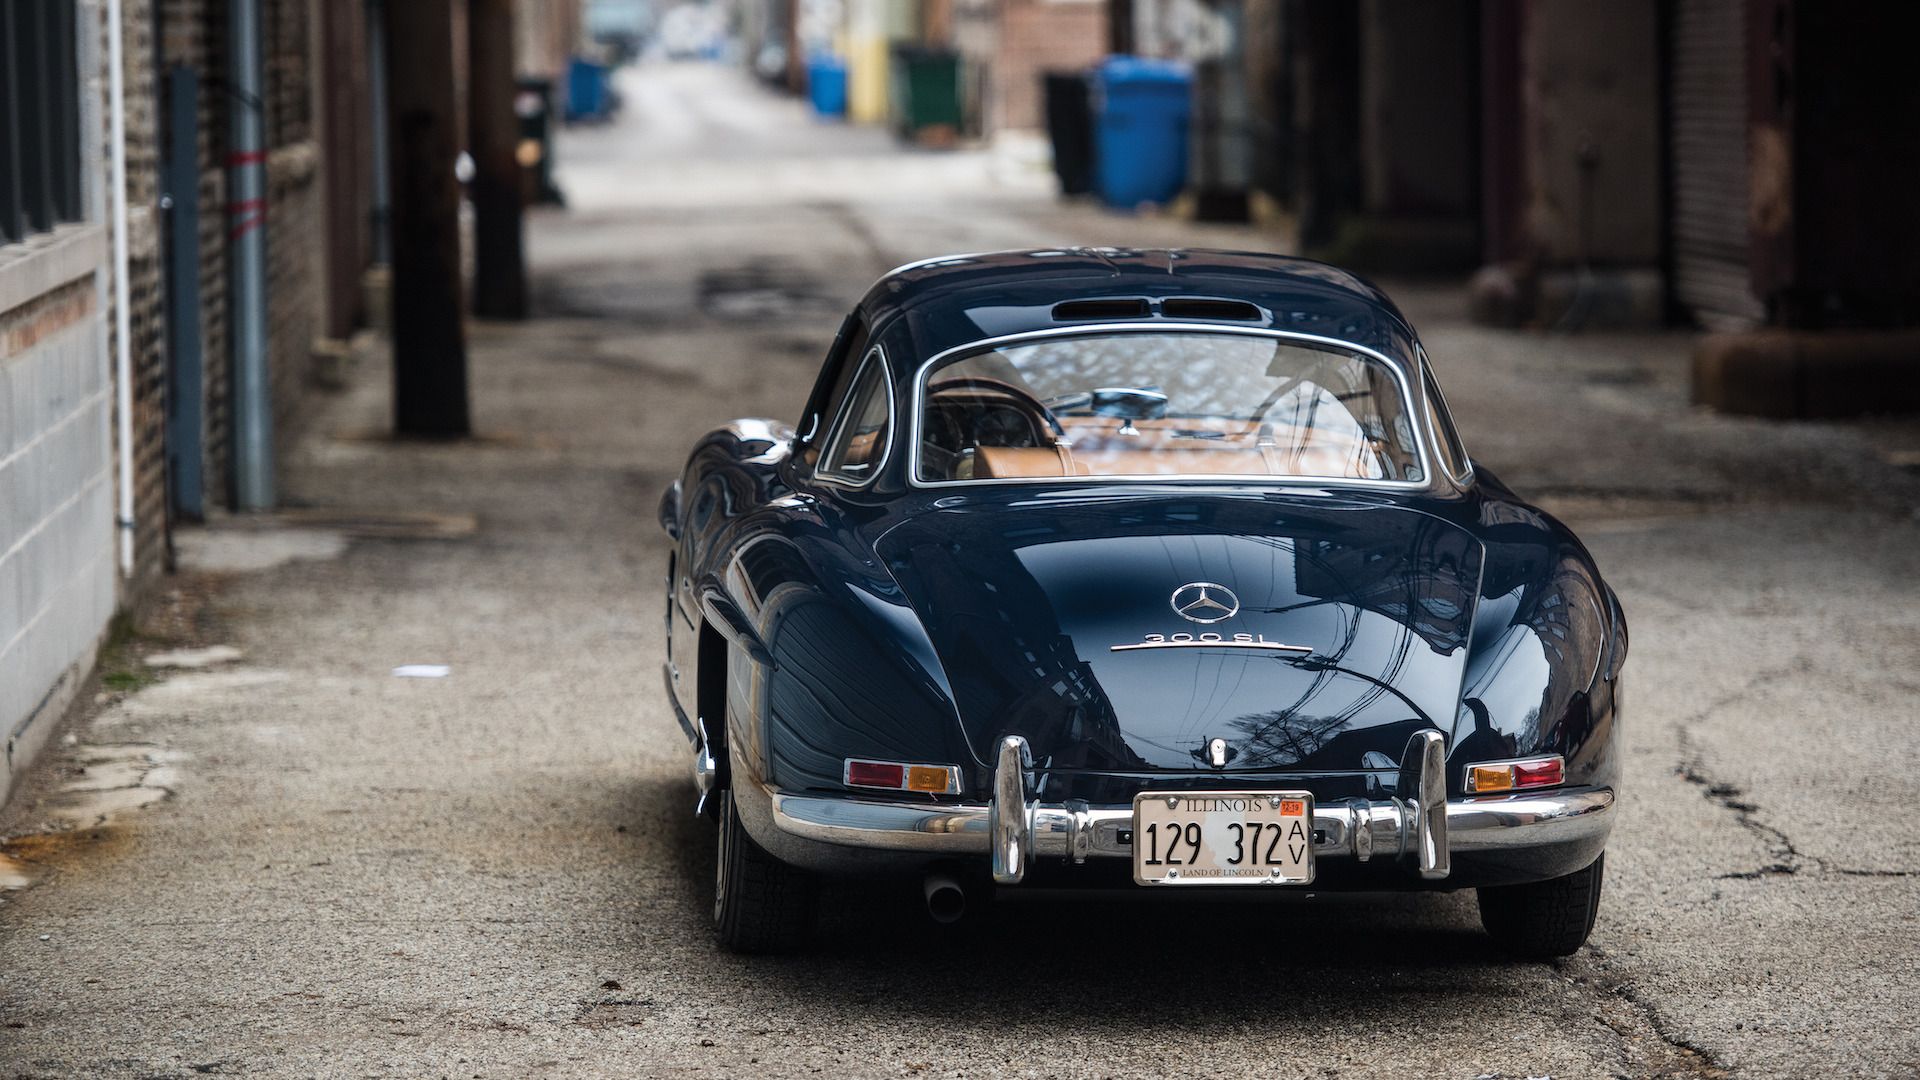 Decades On, Mercedes 300 SL Gullwing Is Still Utterly Gorgeous